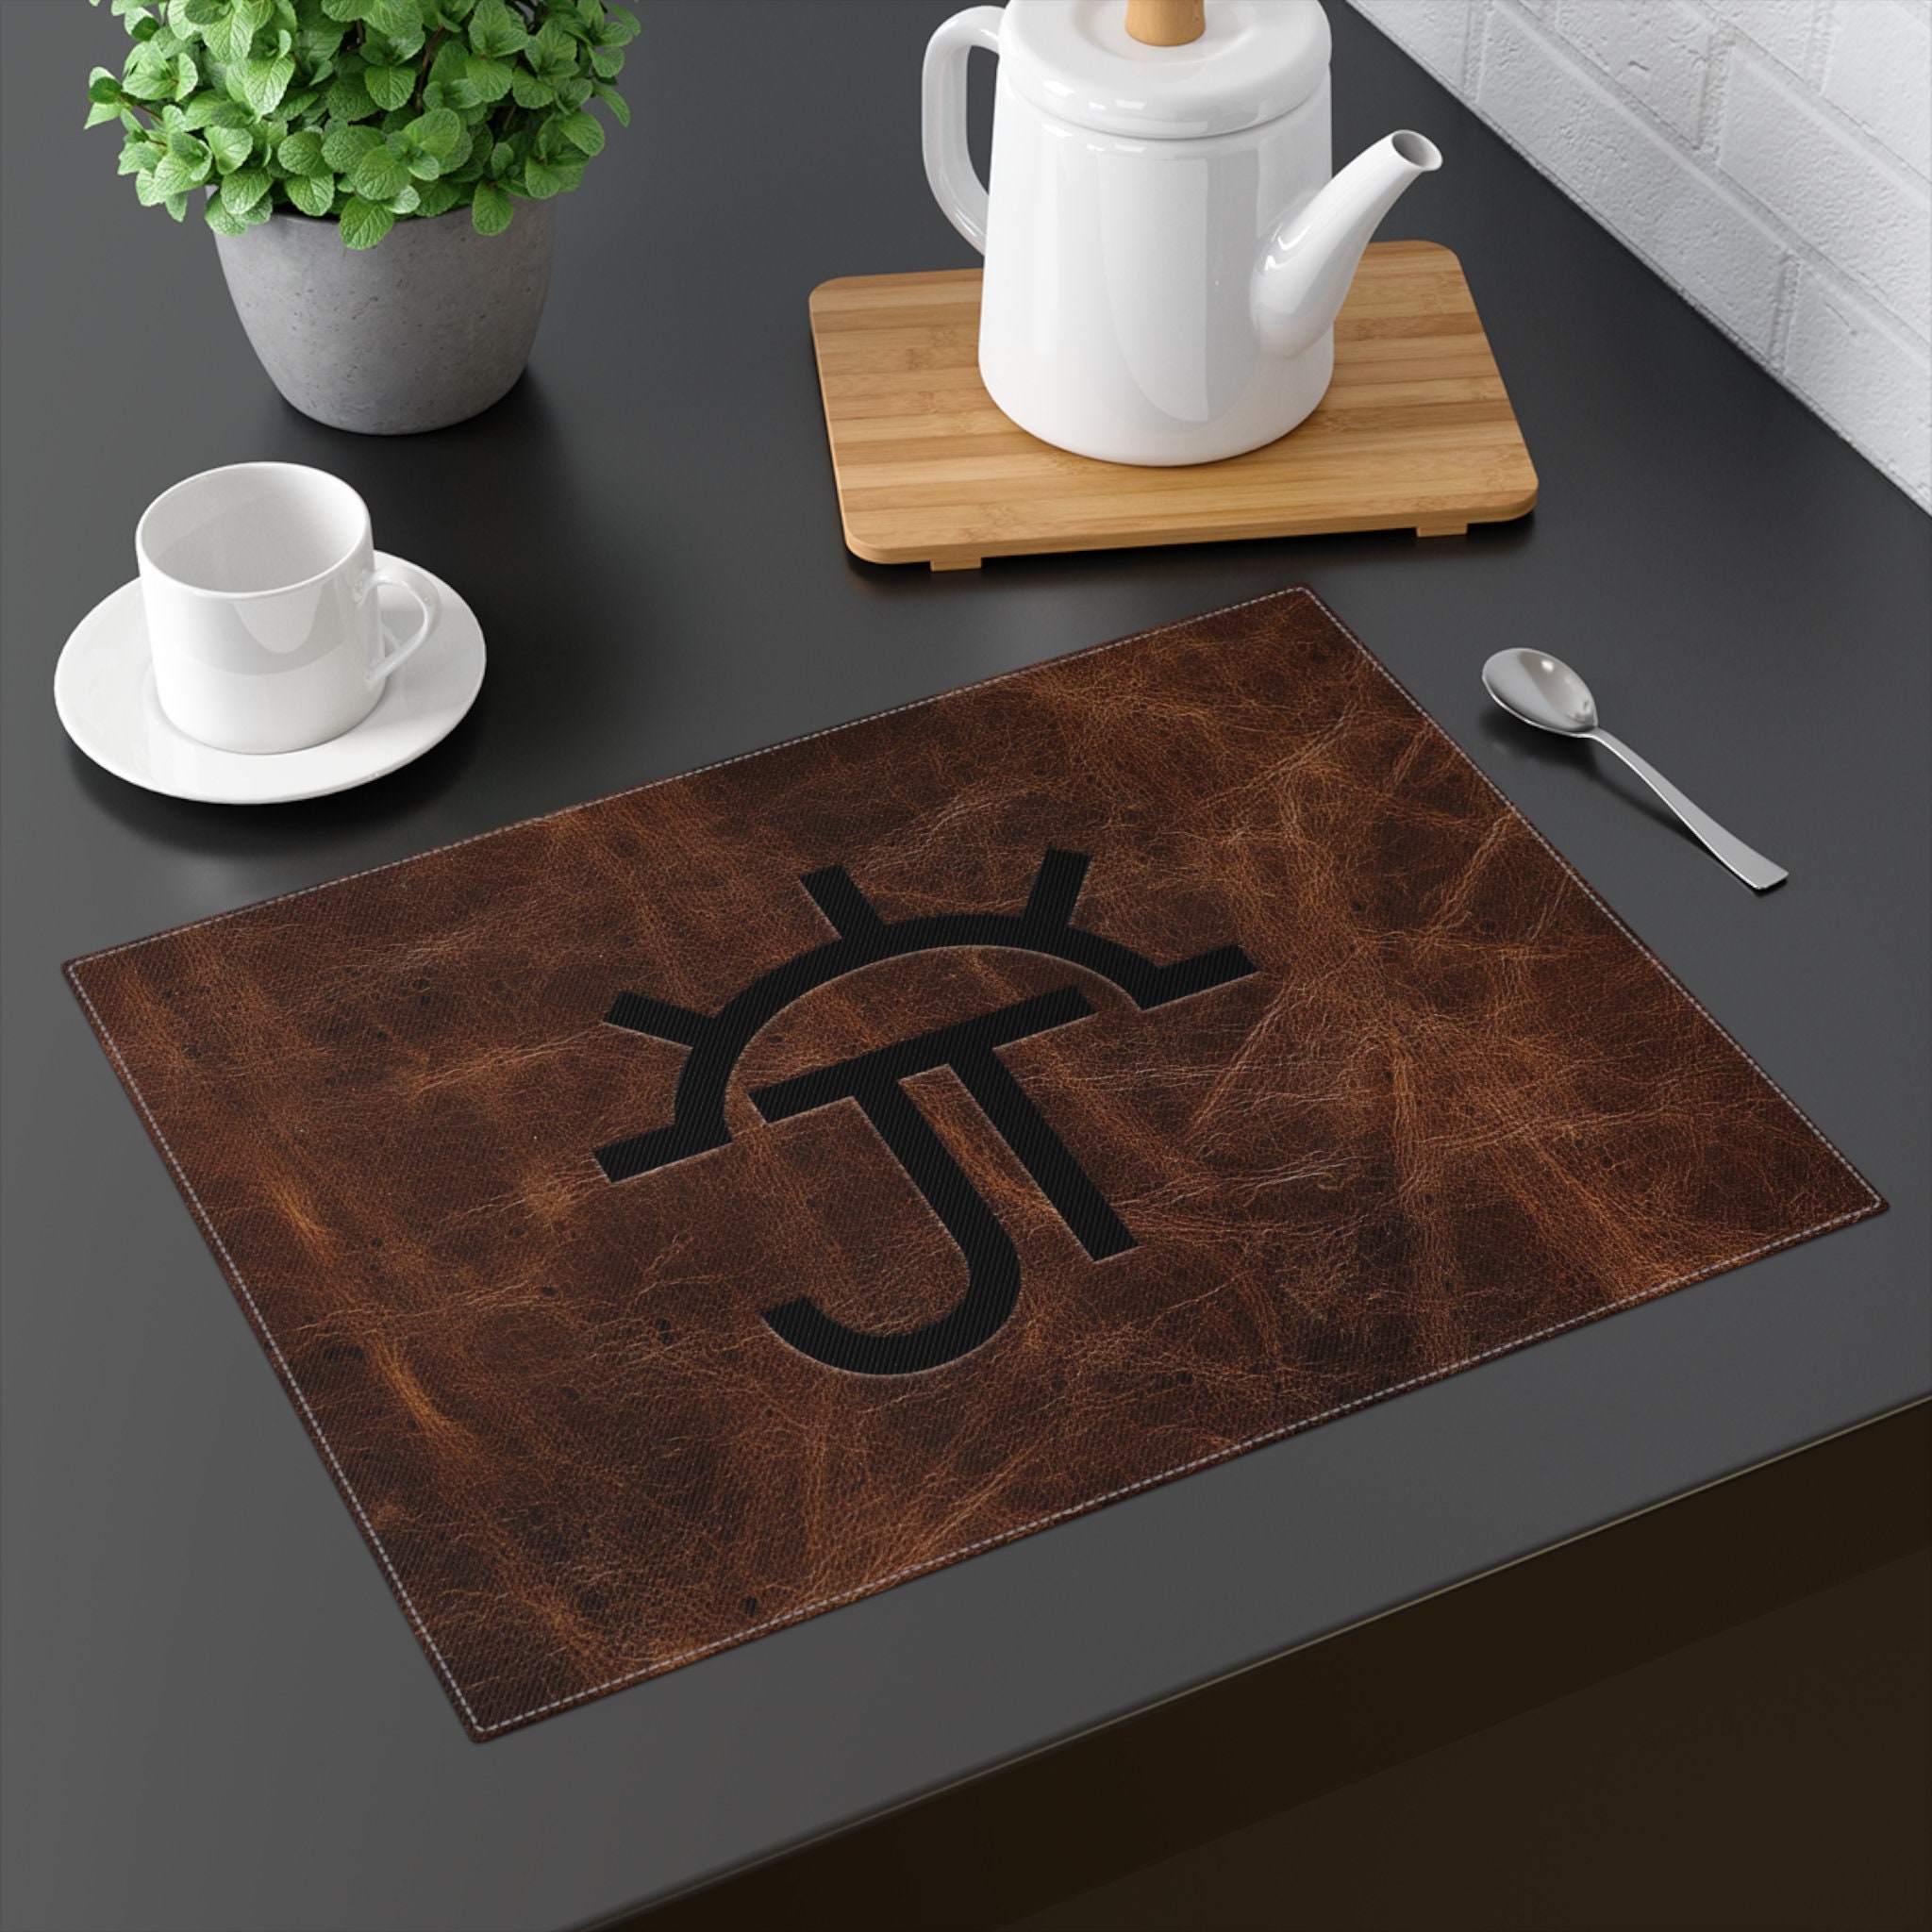 CUSTOM CATTLE BRAND Rustic Leather Pattern Printed 100% Cotton Placemat Ranch Western Dinning Table Home Decoration Cowboy Decor 1pc